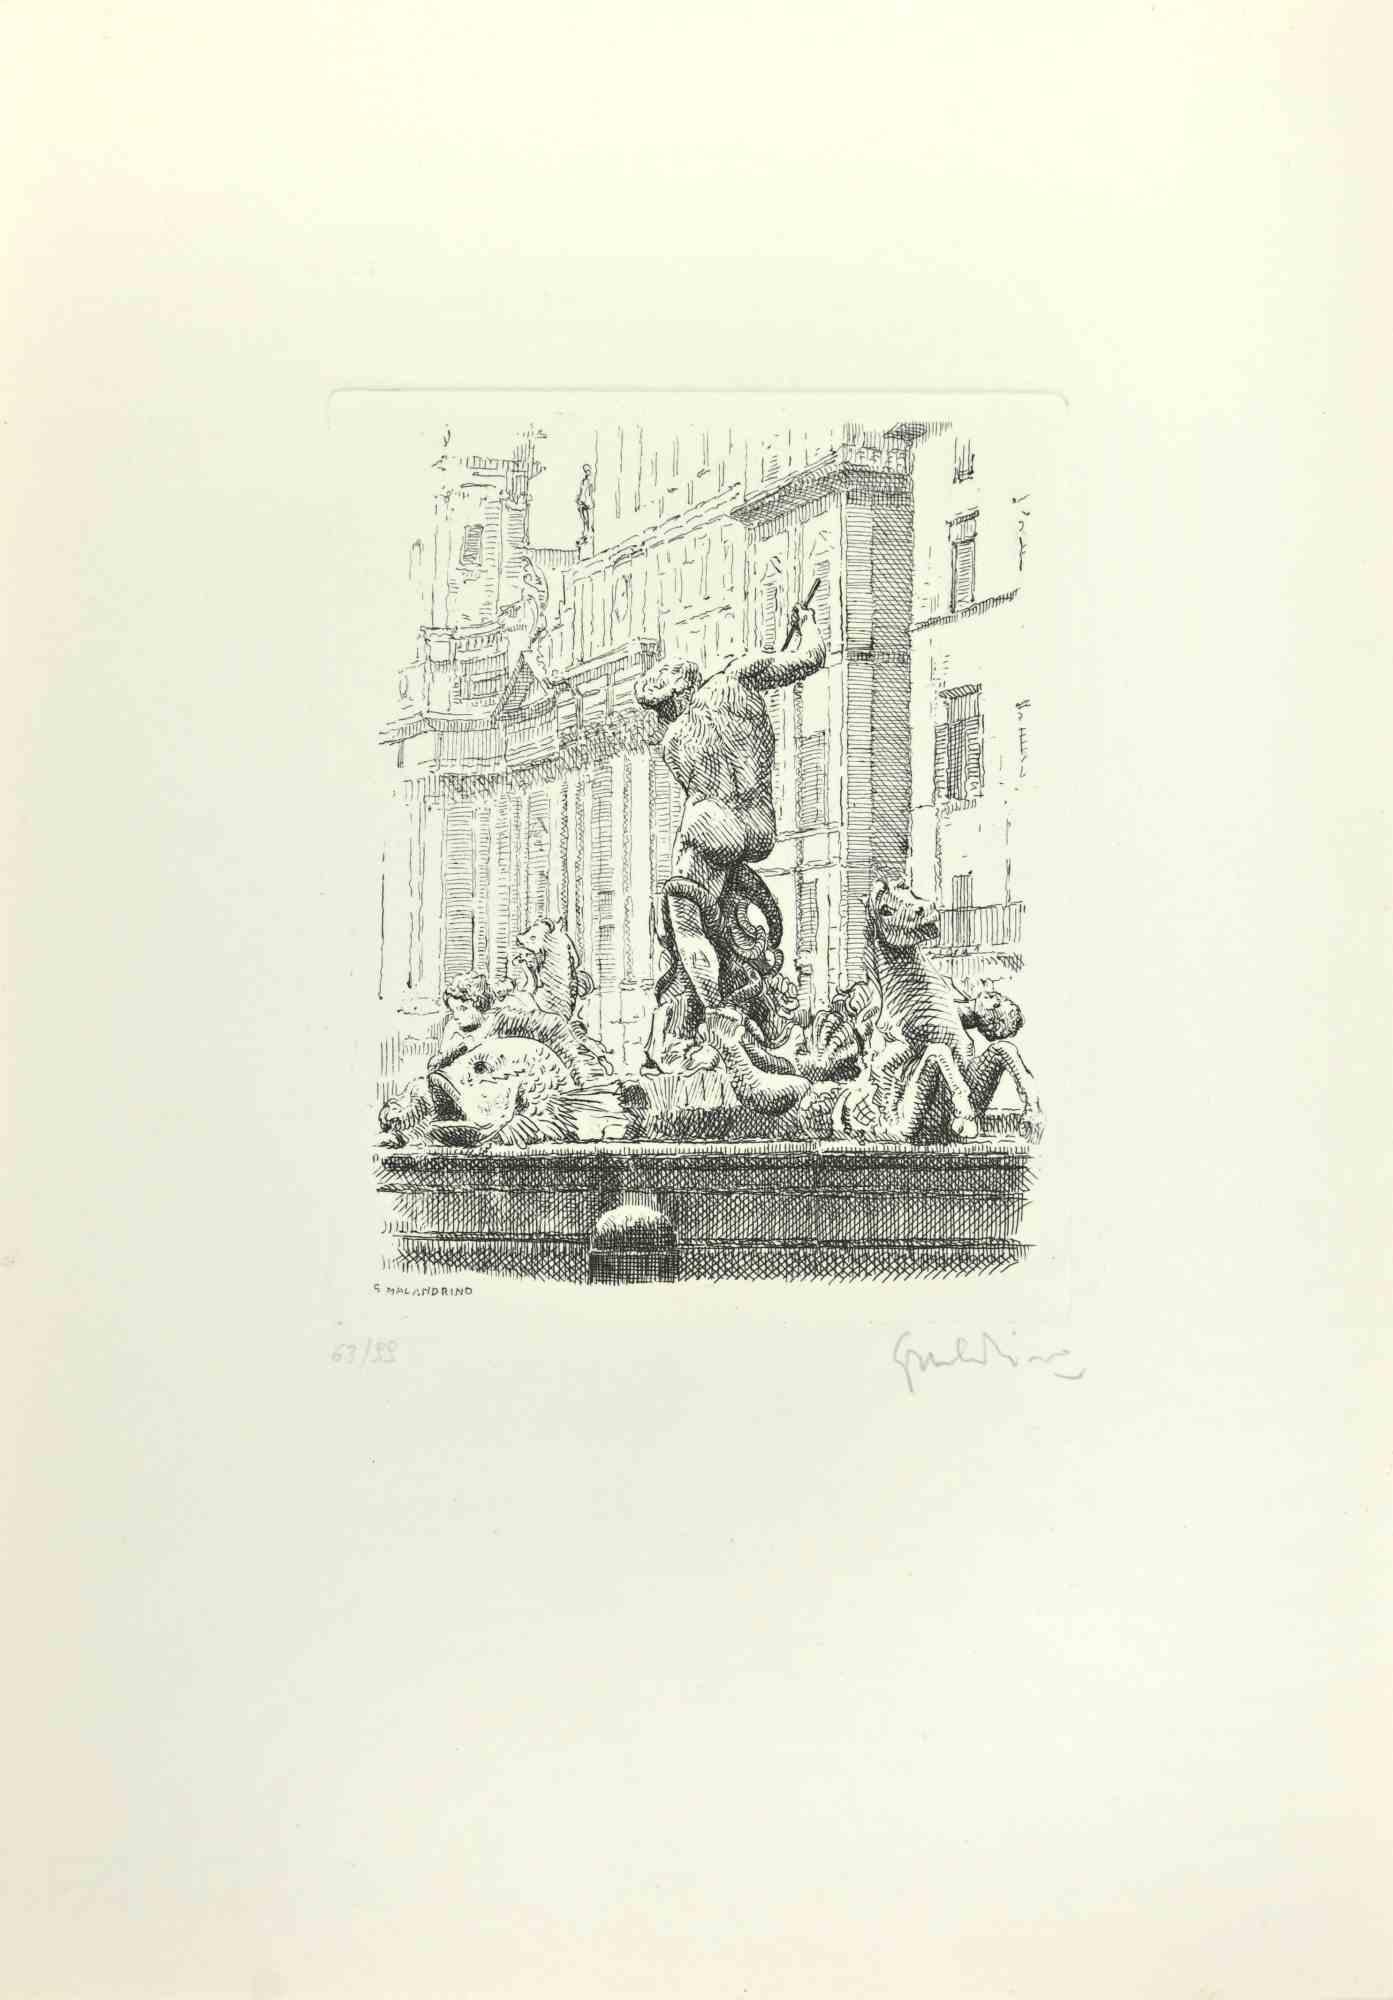 Navona Square is an artwork realized by Giuseppe Malandrino.

Print in etching technique.

Hand-signed by the artist in pencil on the lower right corner.

Numbered edition of 99 copies.

Good condition. 

This artwork represents the beautiful roman